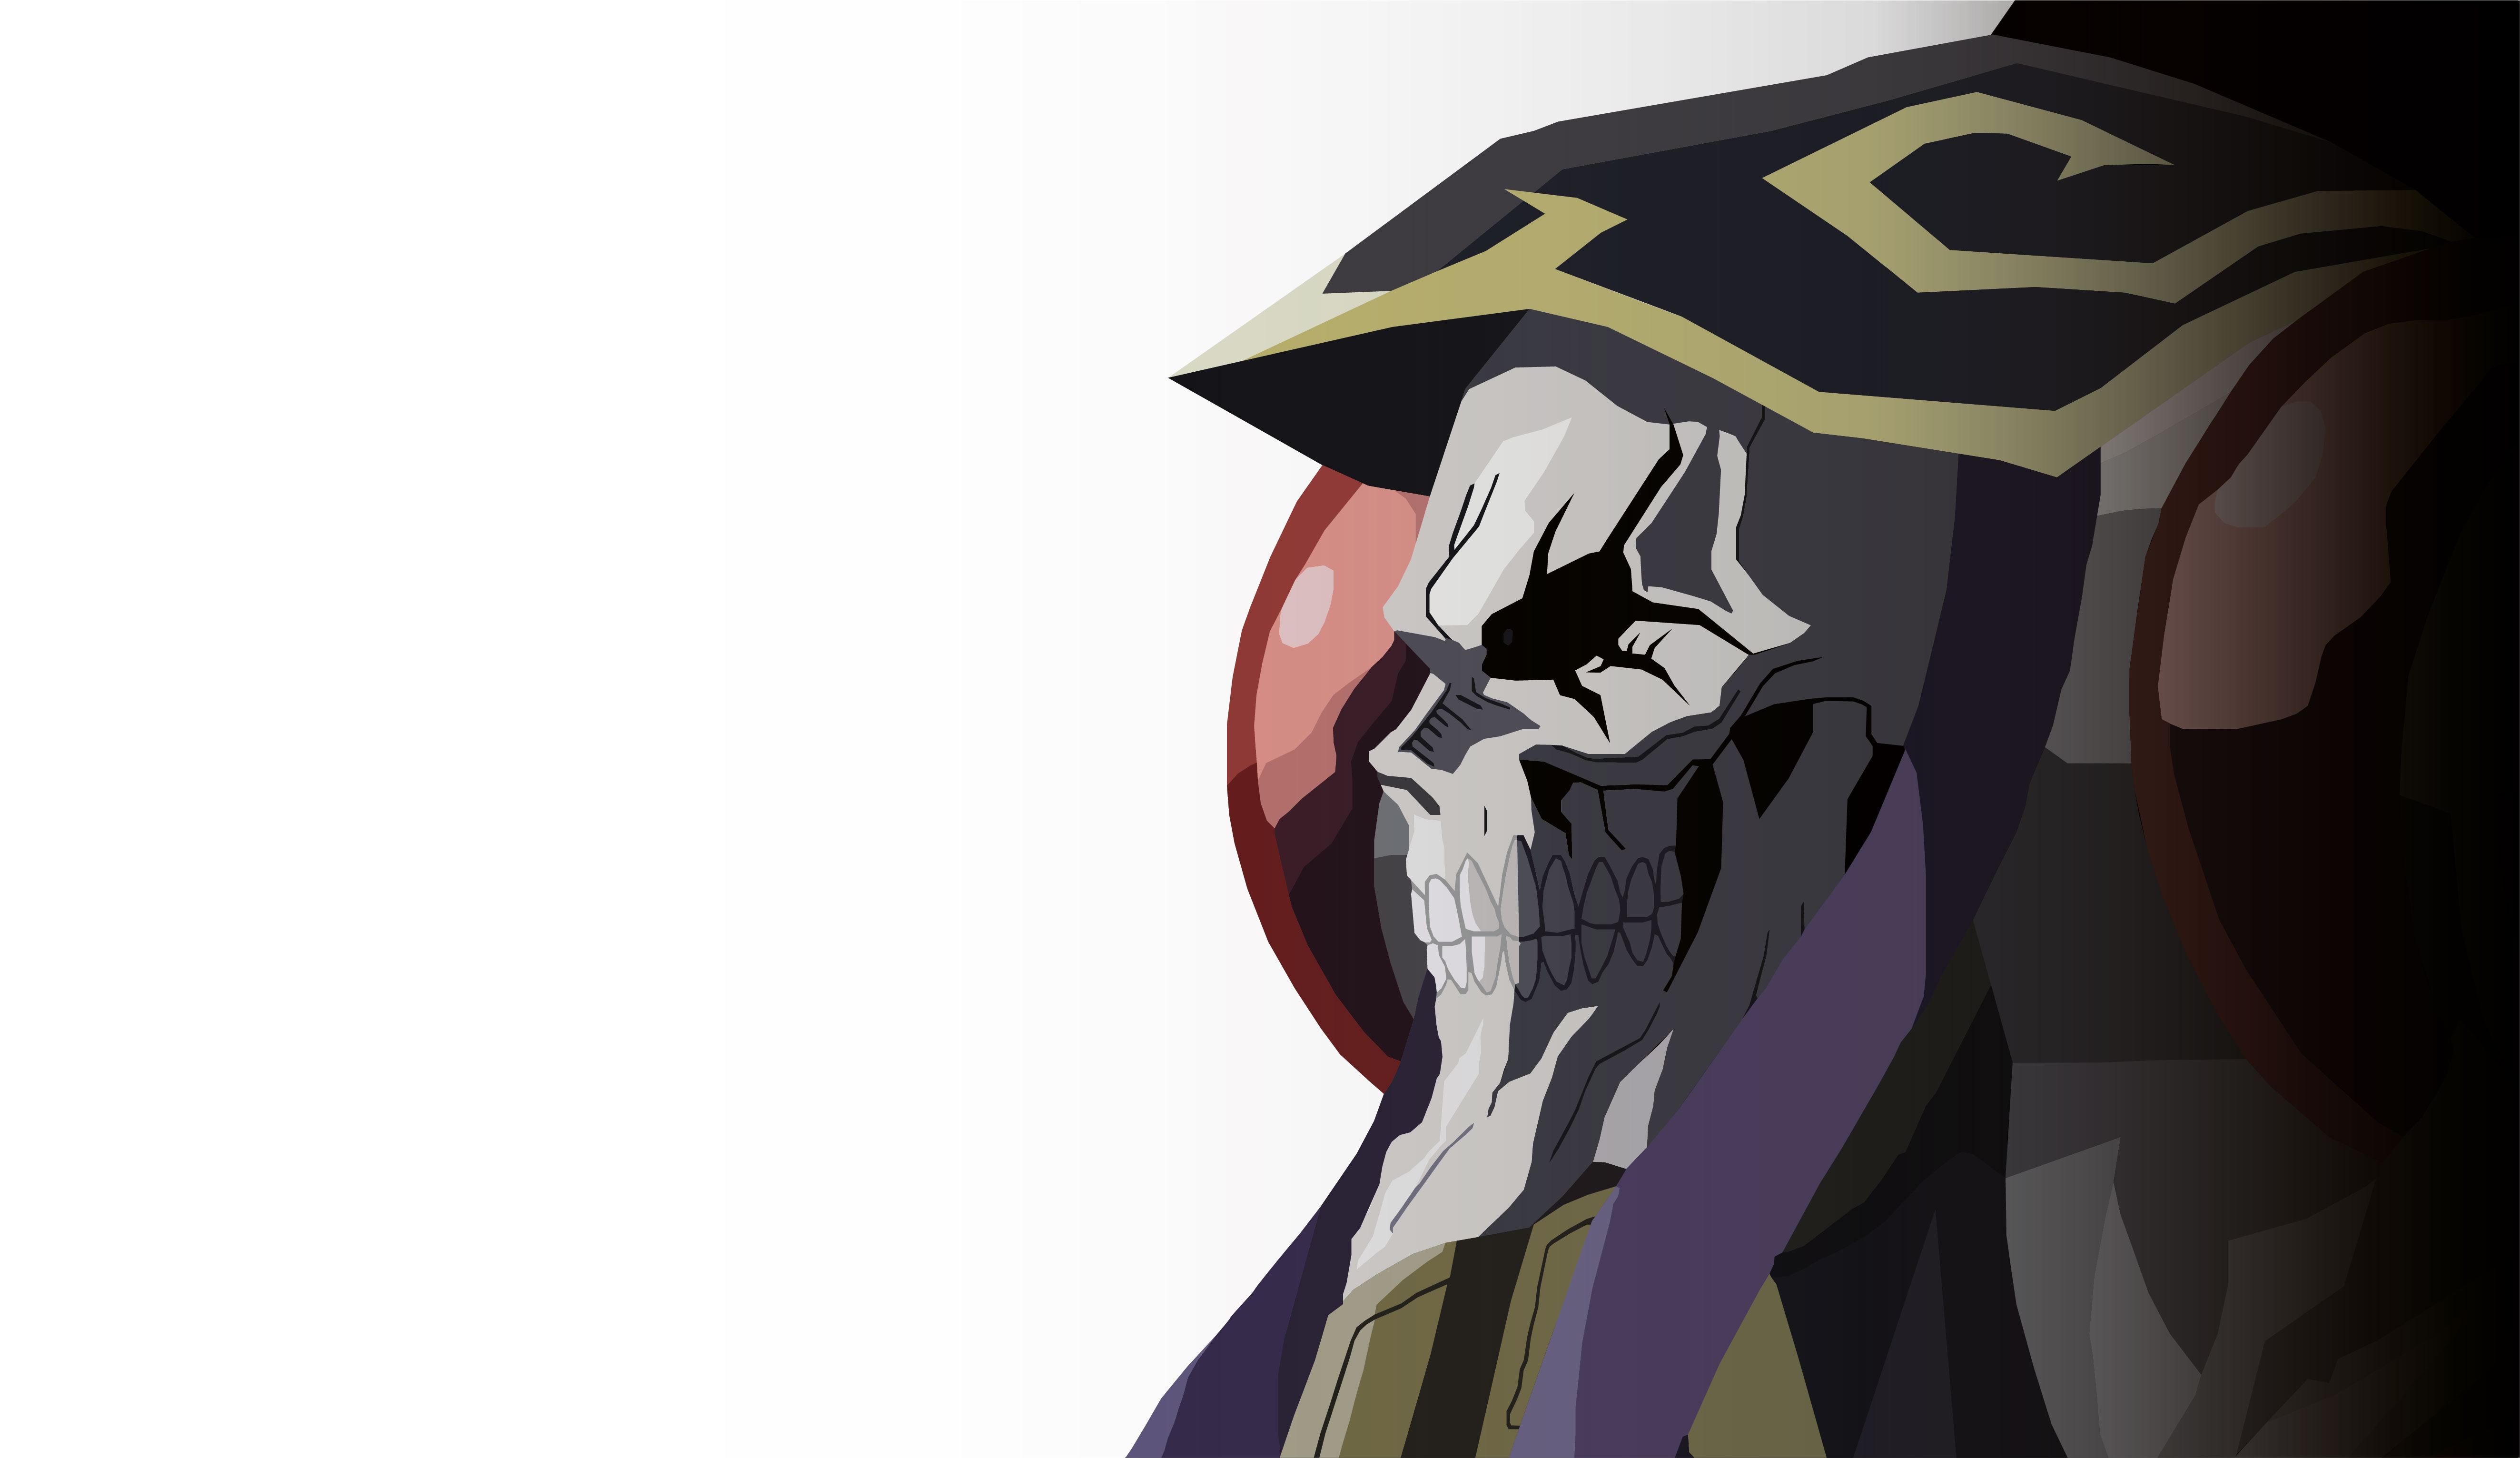 Overlord Ainz Ooal Gown by Roaralio on DeviantArt